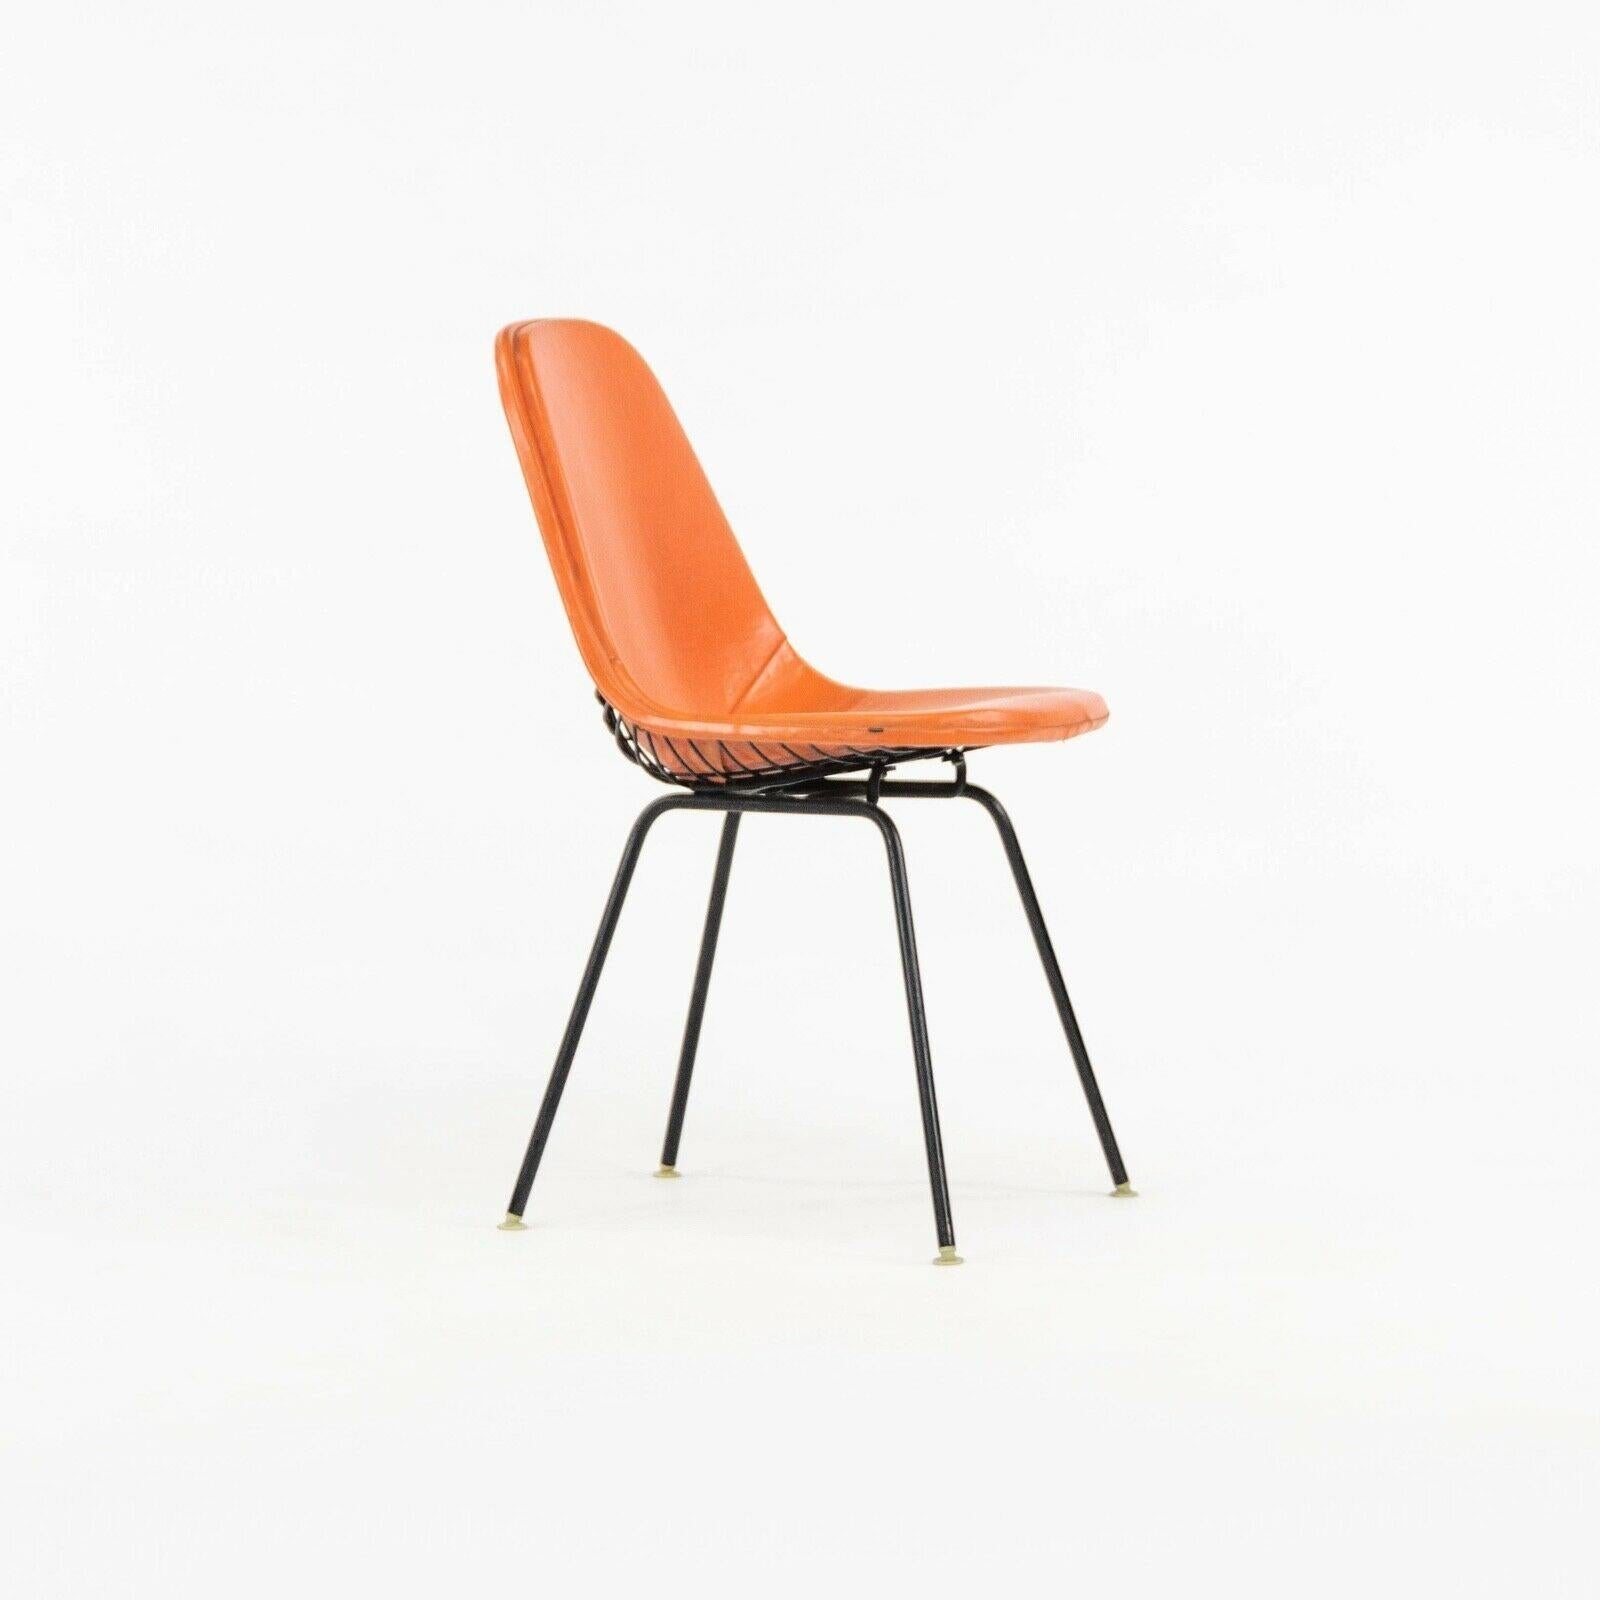 Listed for sale is a single circa 1957 production Eames DKX dining chair with wire upper and fully upholstered pad. The pad is original naugahyde in a red/orange color. The upholstery is overall in very nice shape, showing some wear from use as